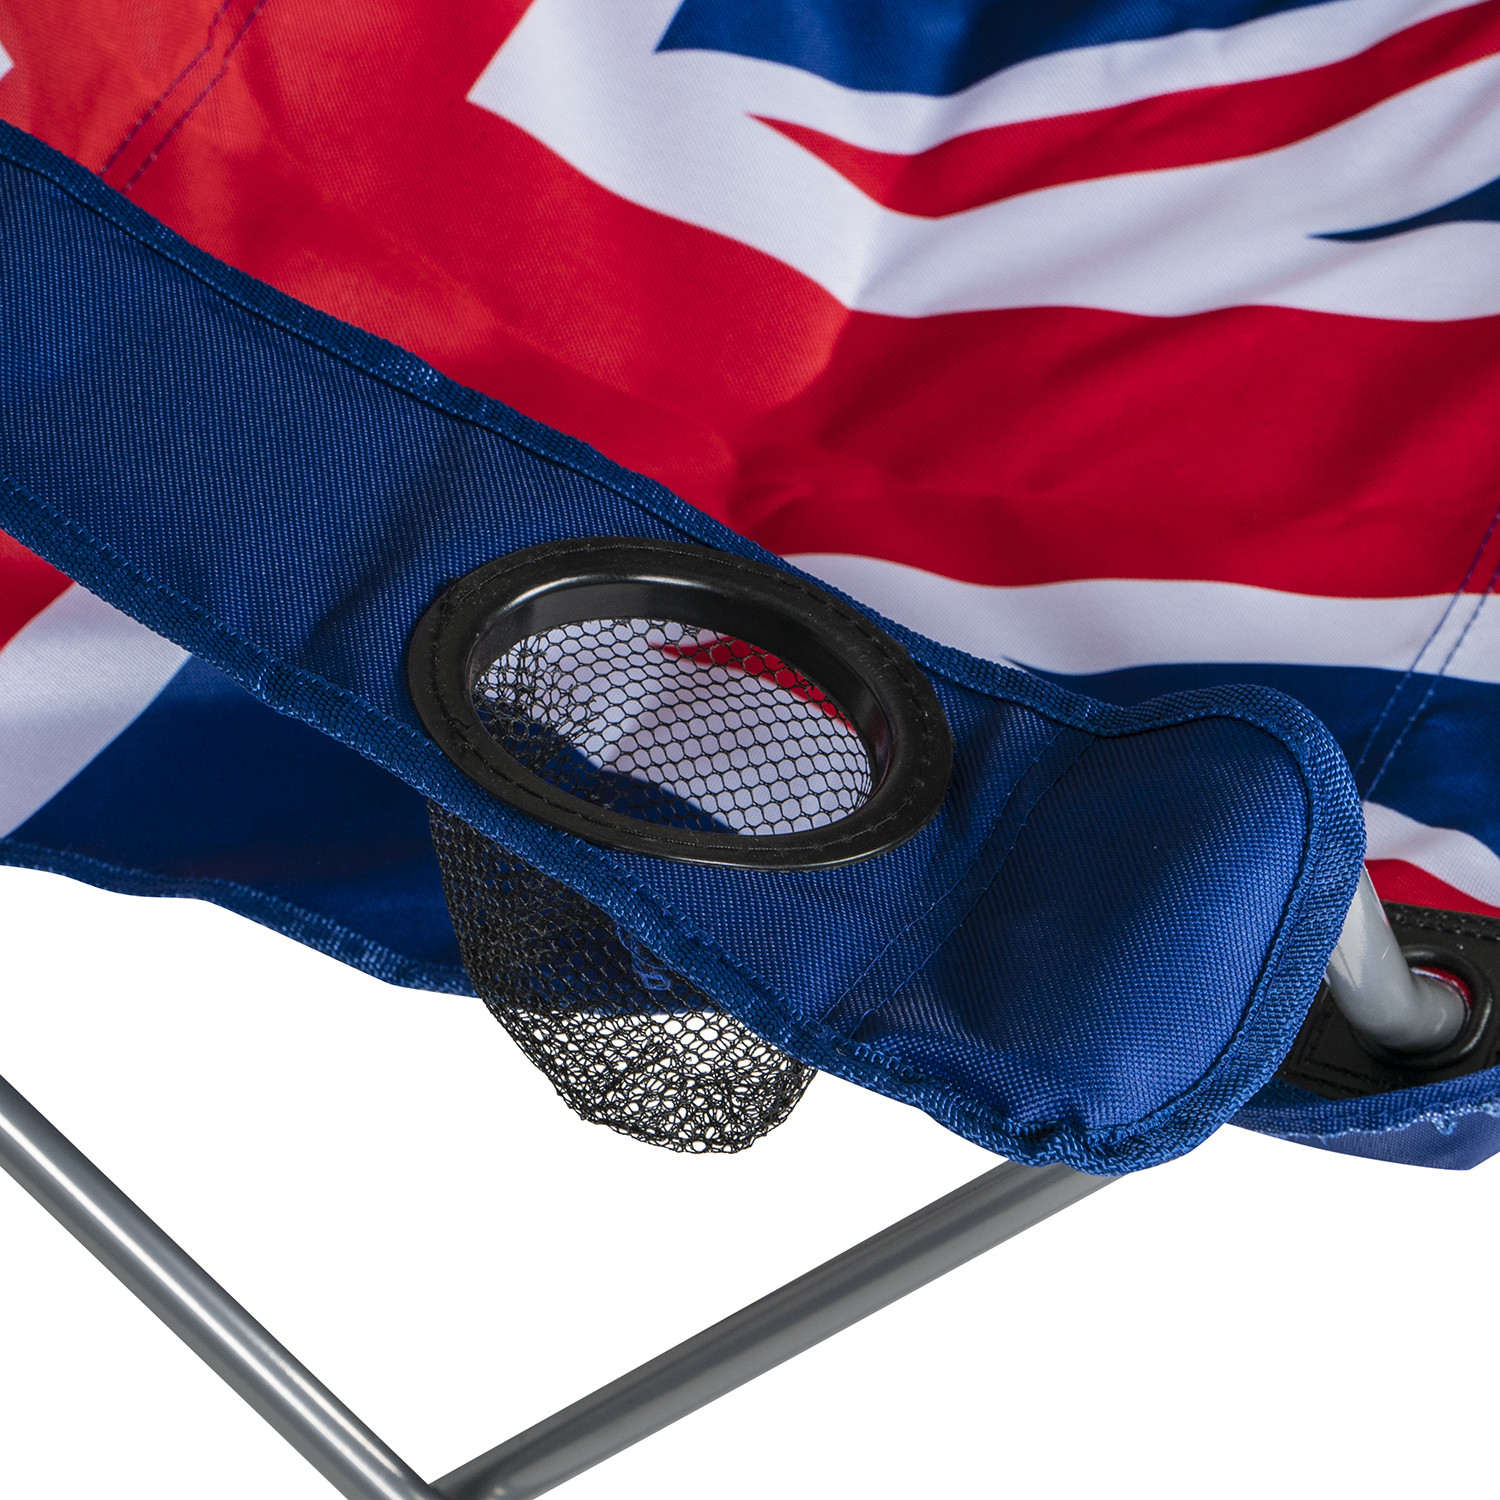 Union Jack Flag Design Camping Chair Image 3